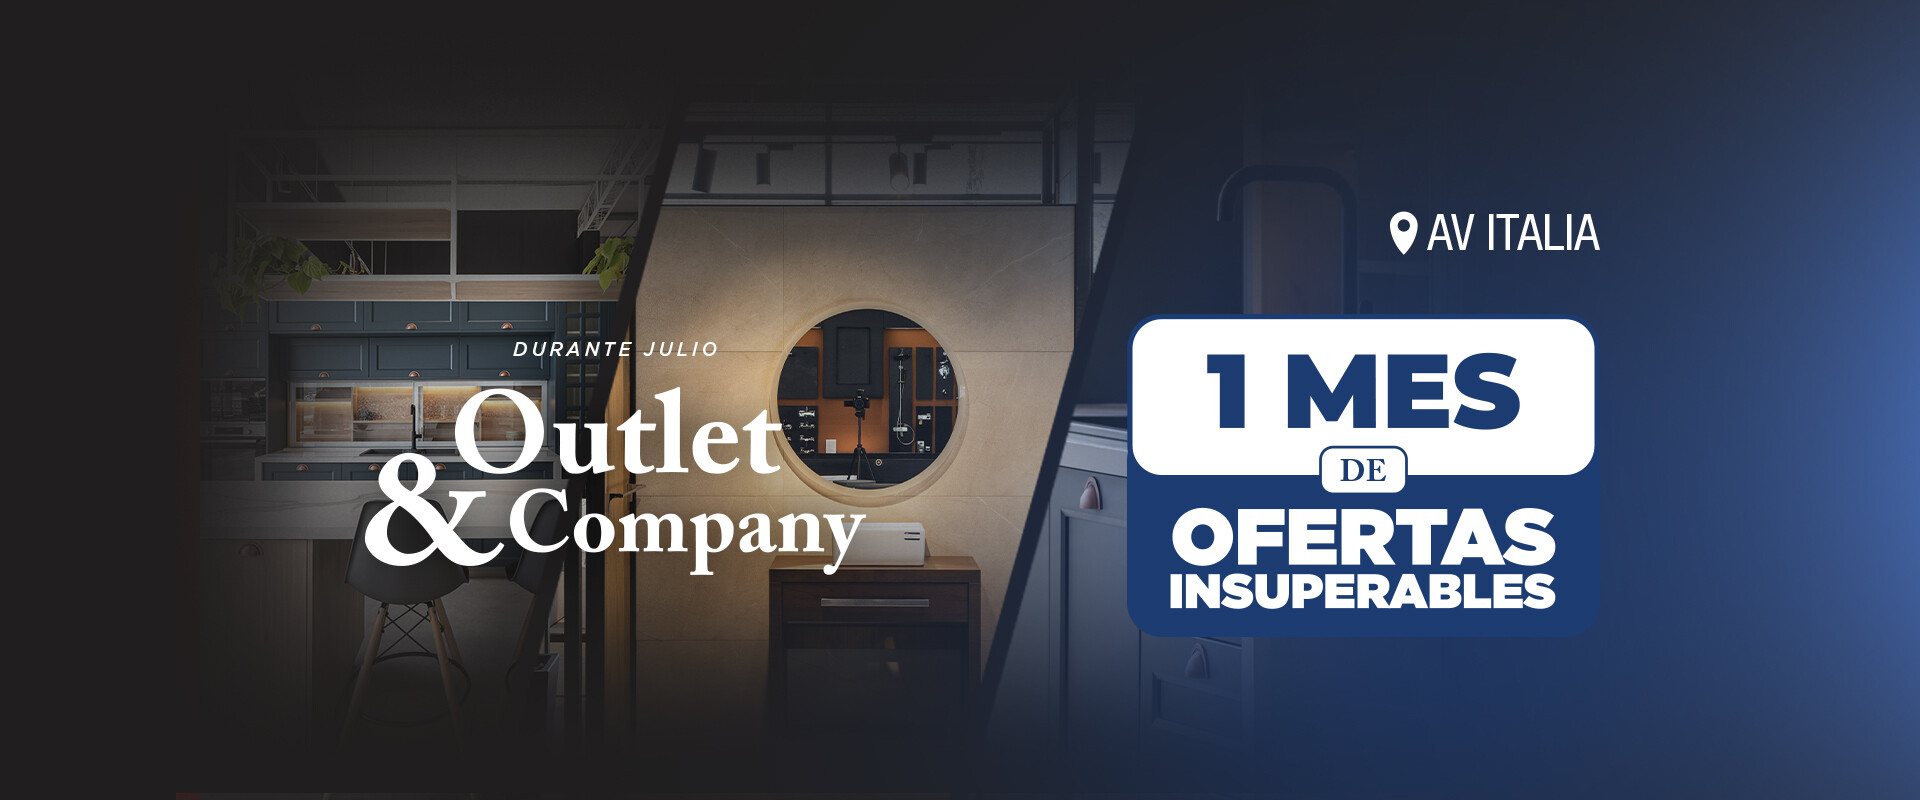 Outlet&company